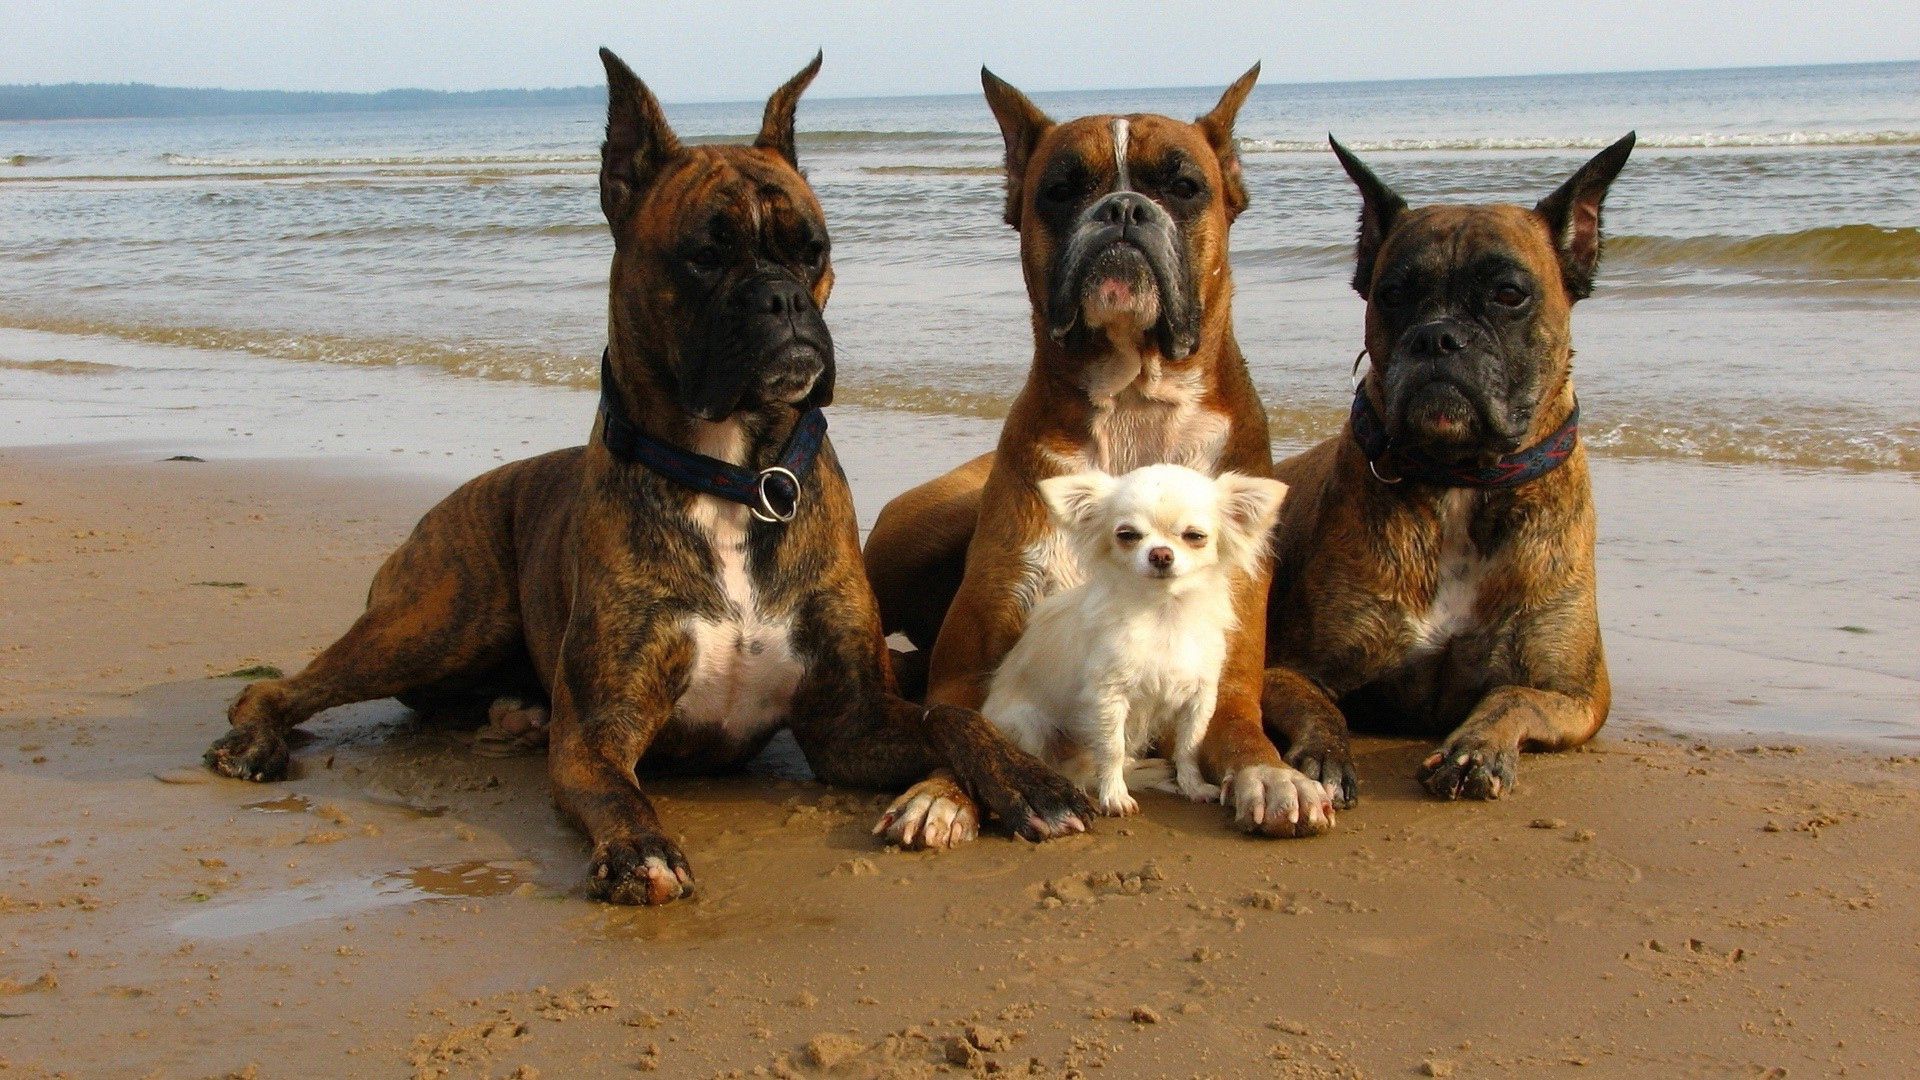 animals, dogs, beach, care, protection